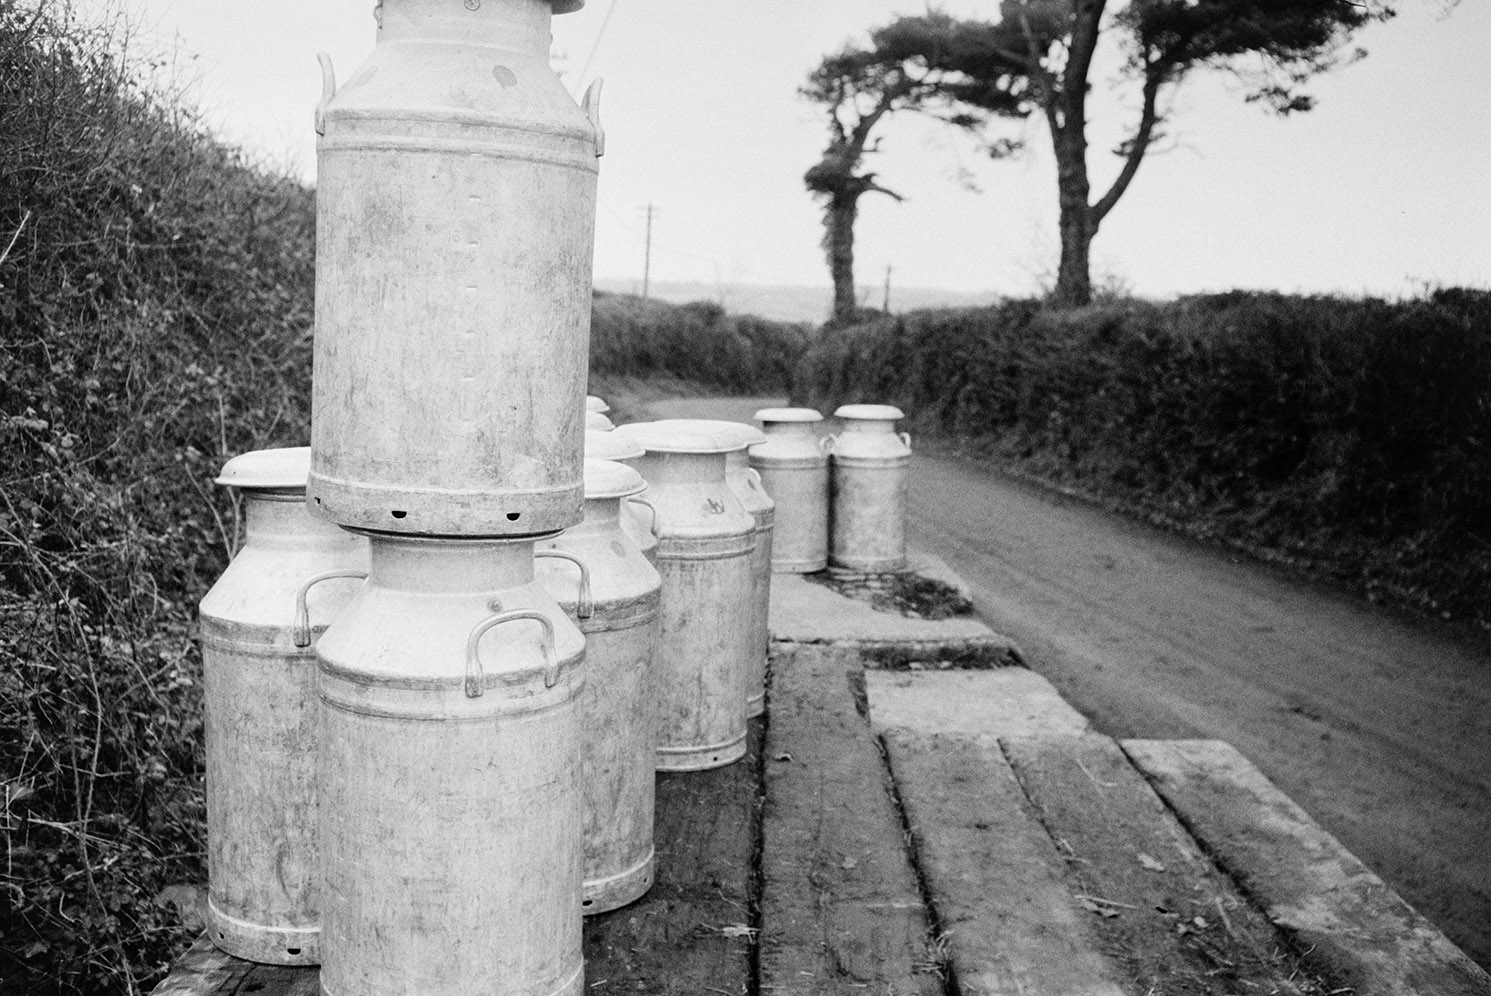 Milk churns stacked on a wooden milk churn stand by a road, at Dolton.